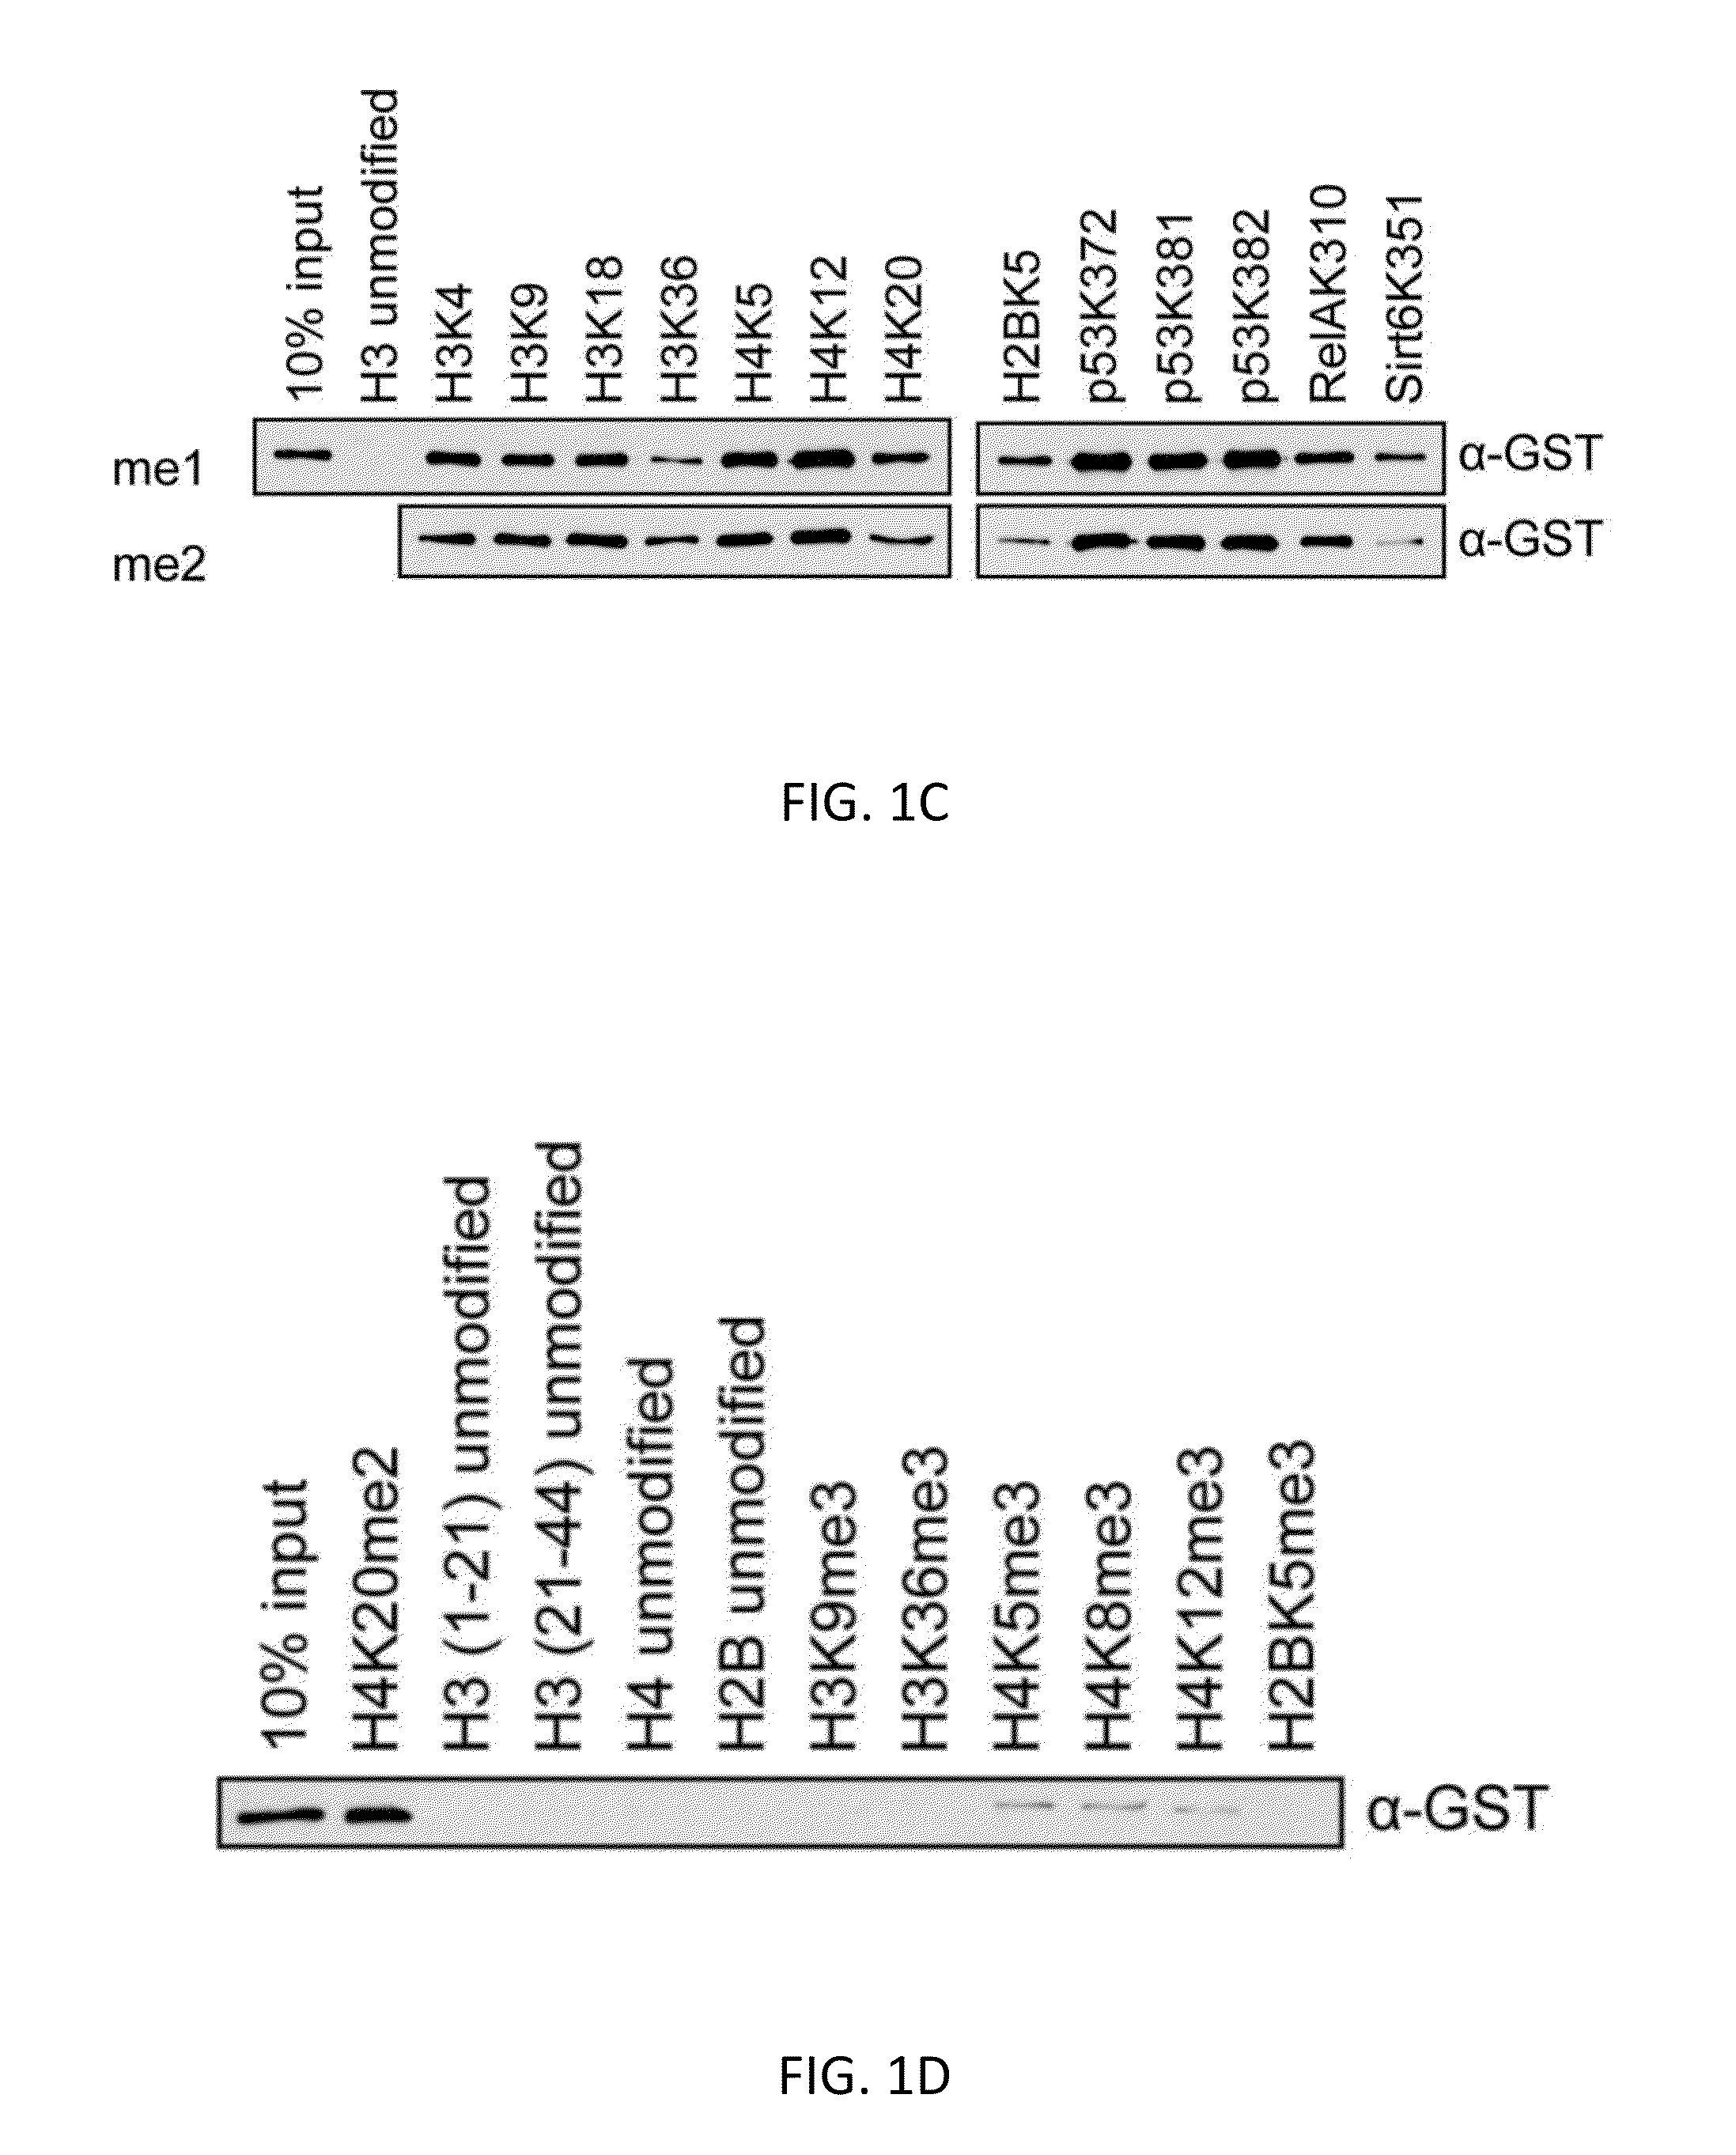 Affinity reagents and methods for detection, purification, and proteomic analysis of methylated proteins